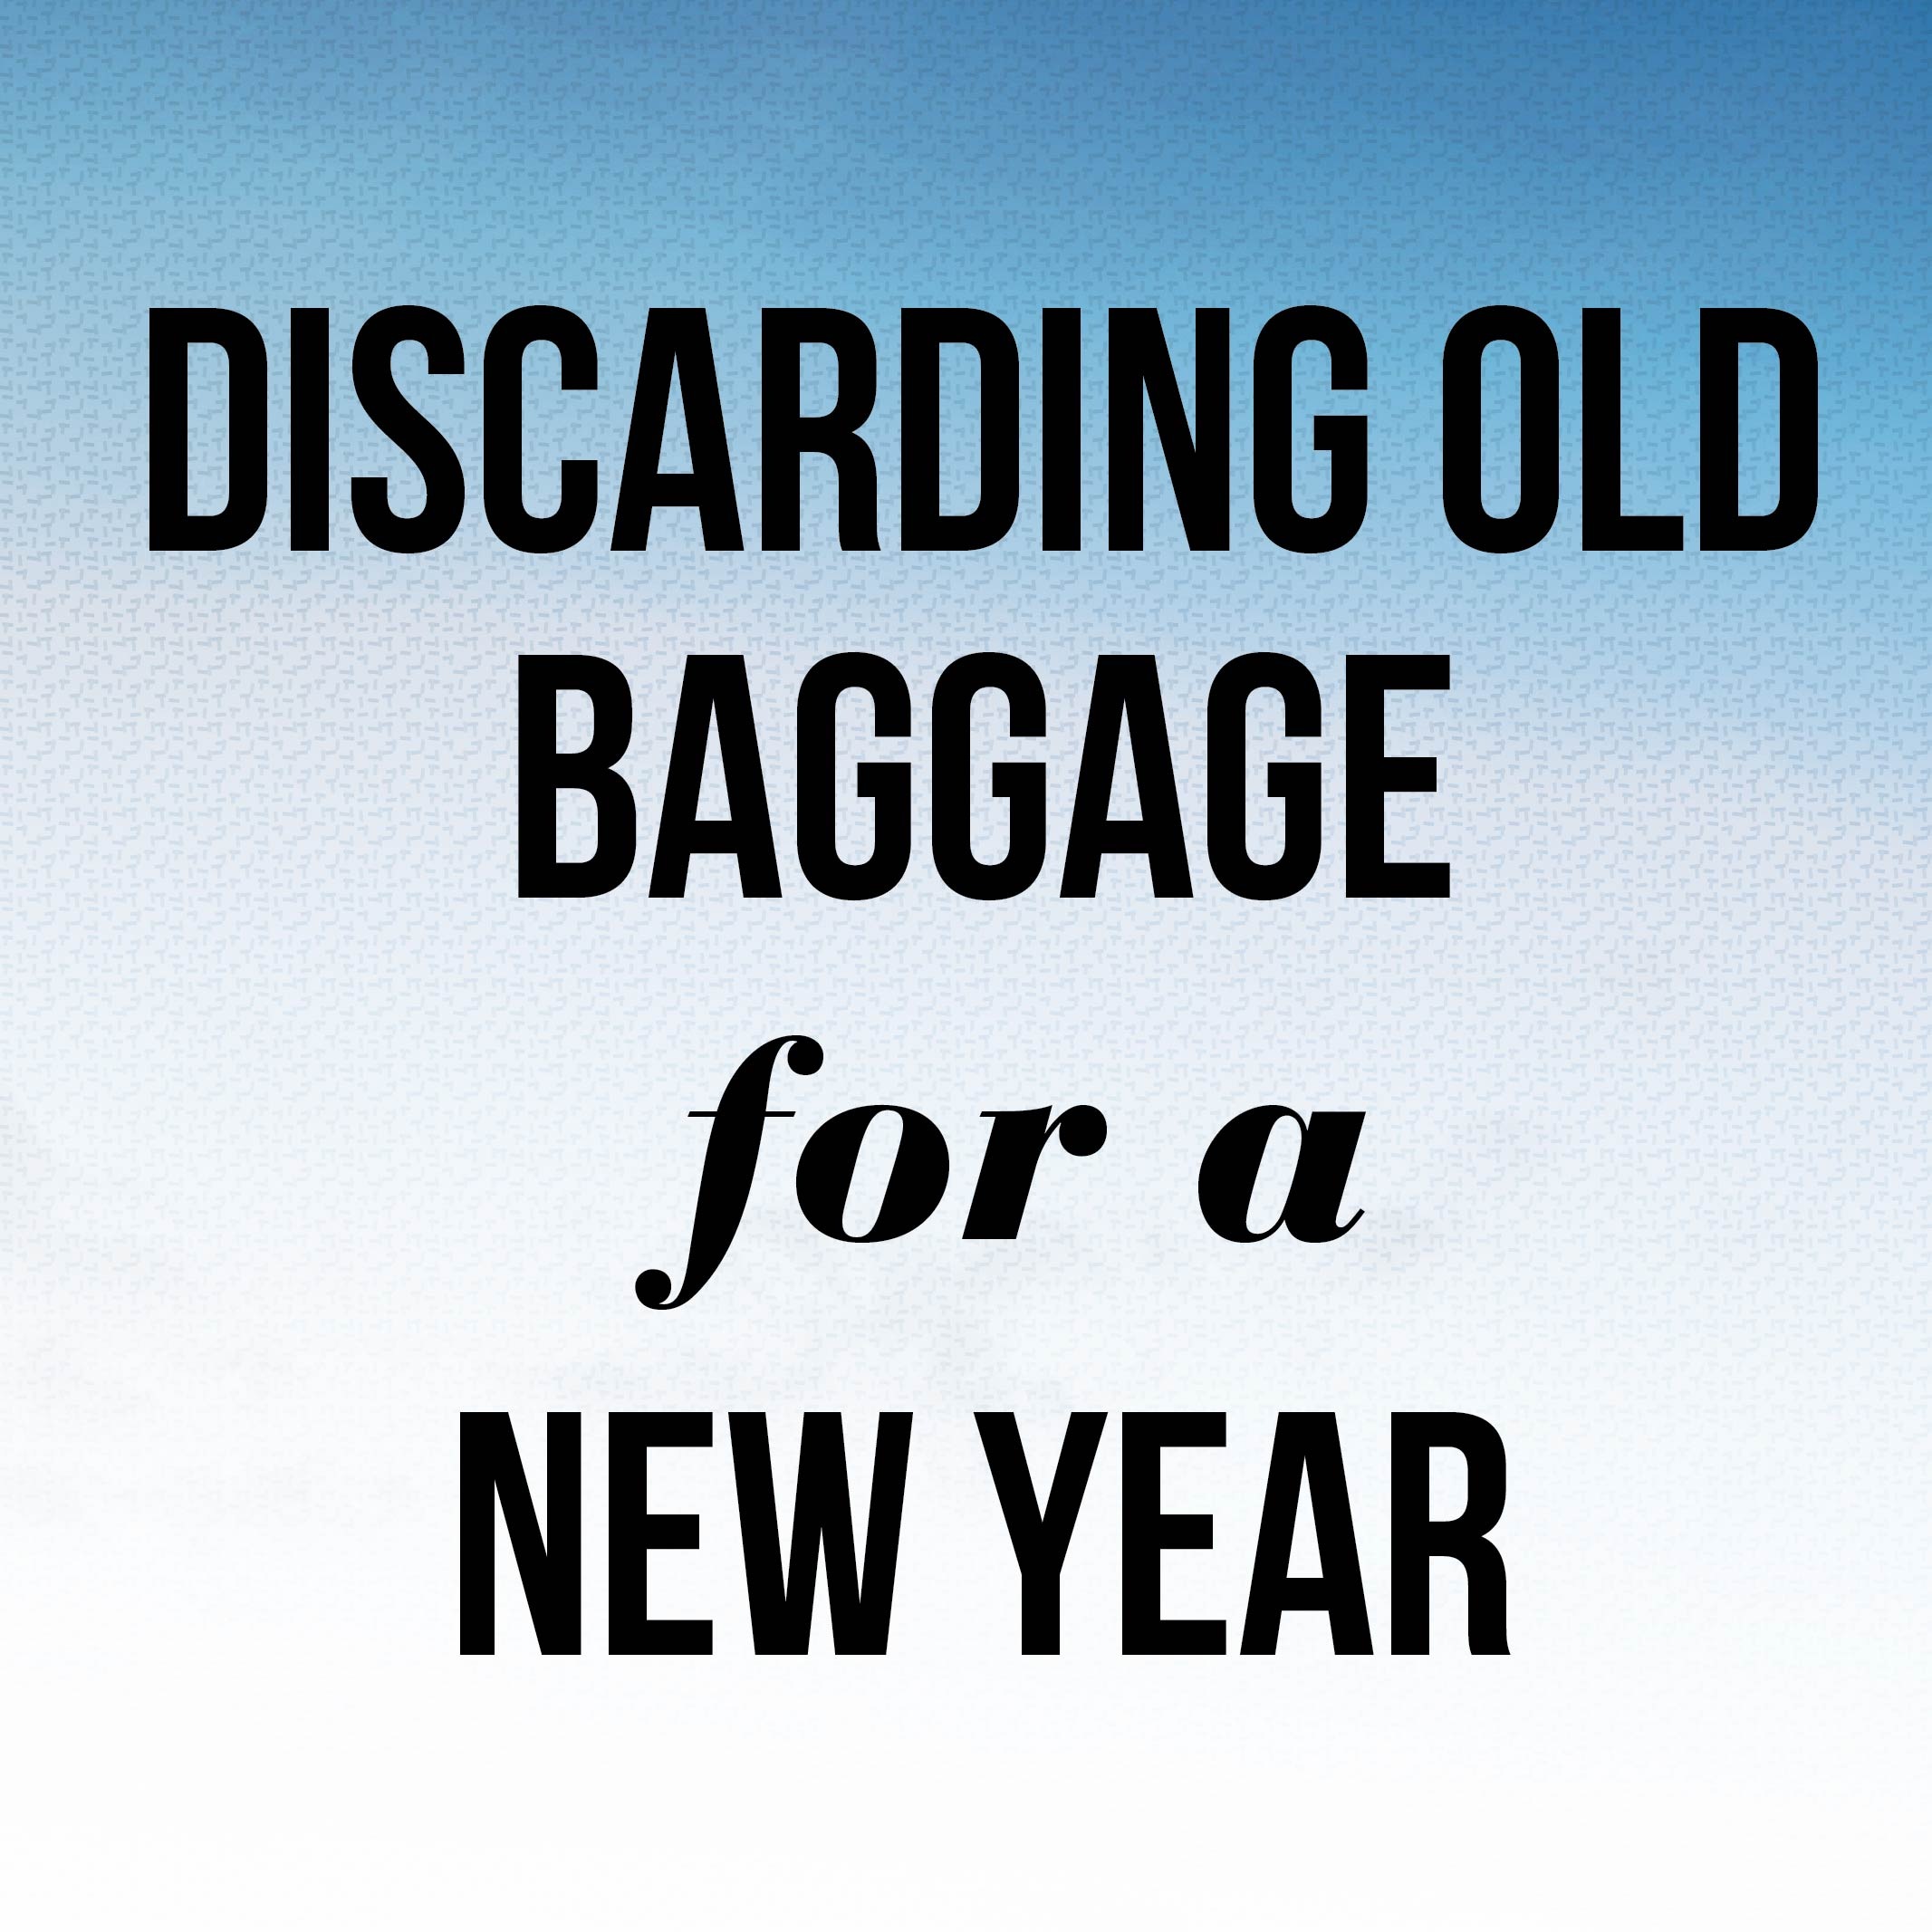 Discarding Old Baggage for a New Year